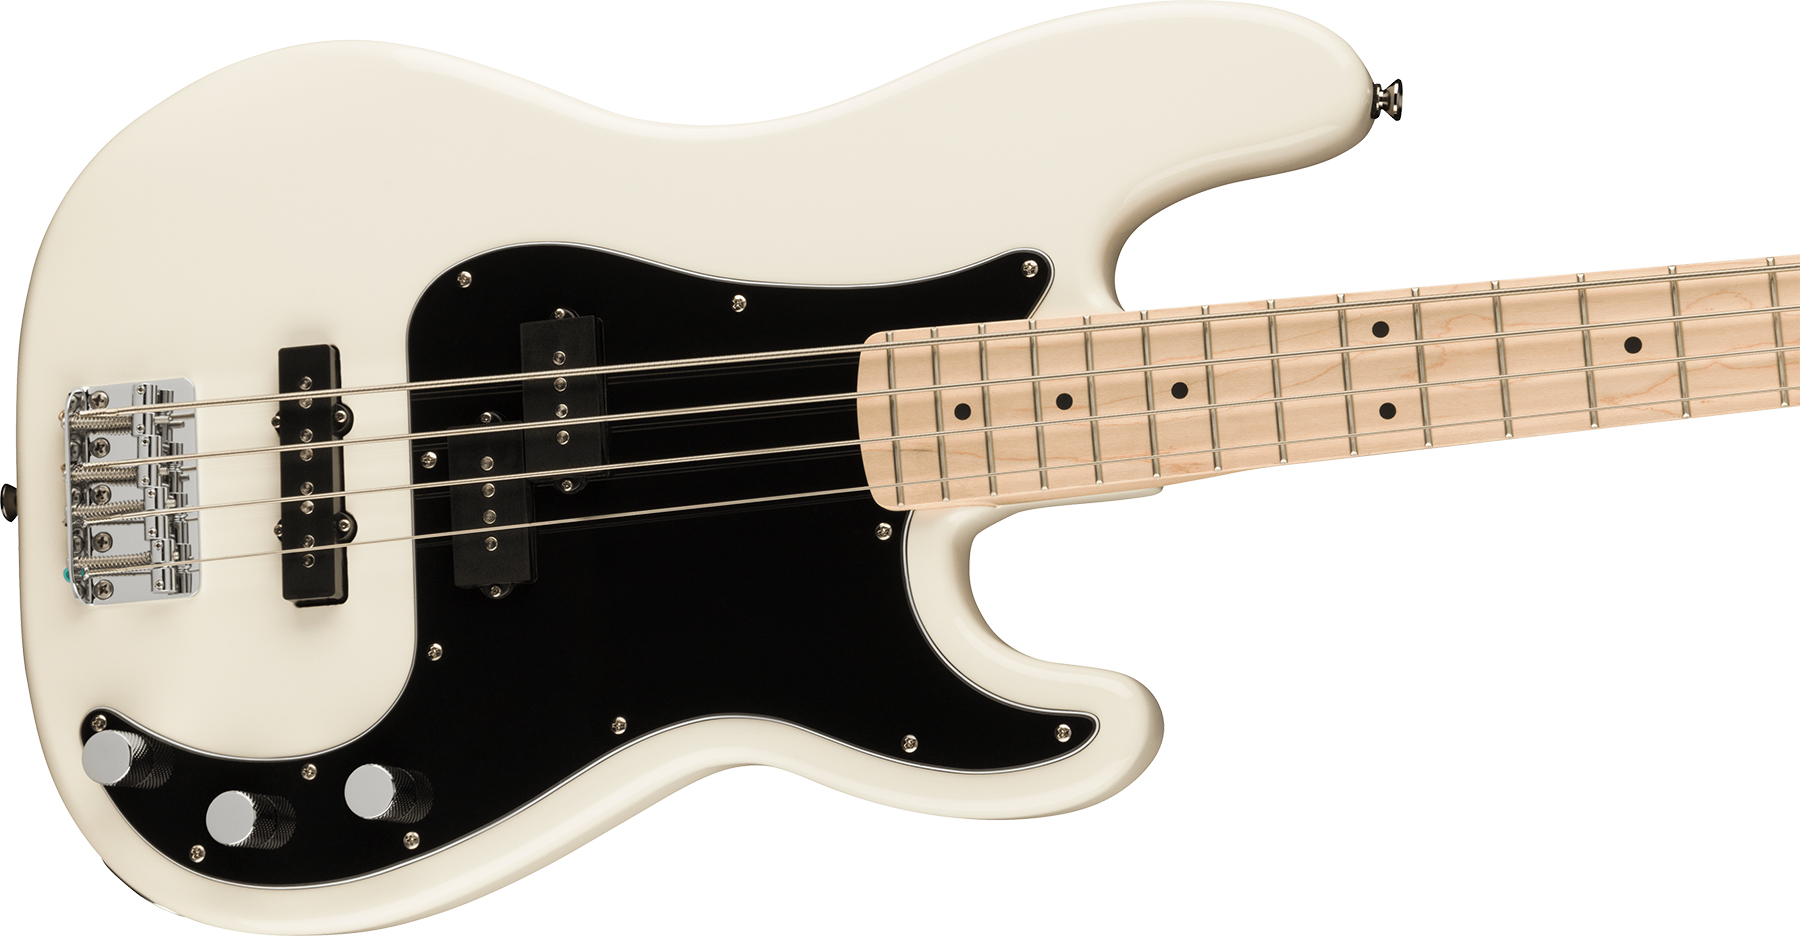 Squier Precision Bass Affinity Pj 2021 Mn - Olympic White - Solid body electric bass - Variation 2